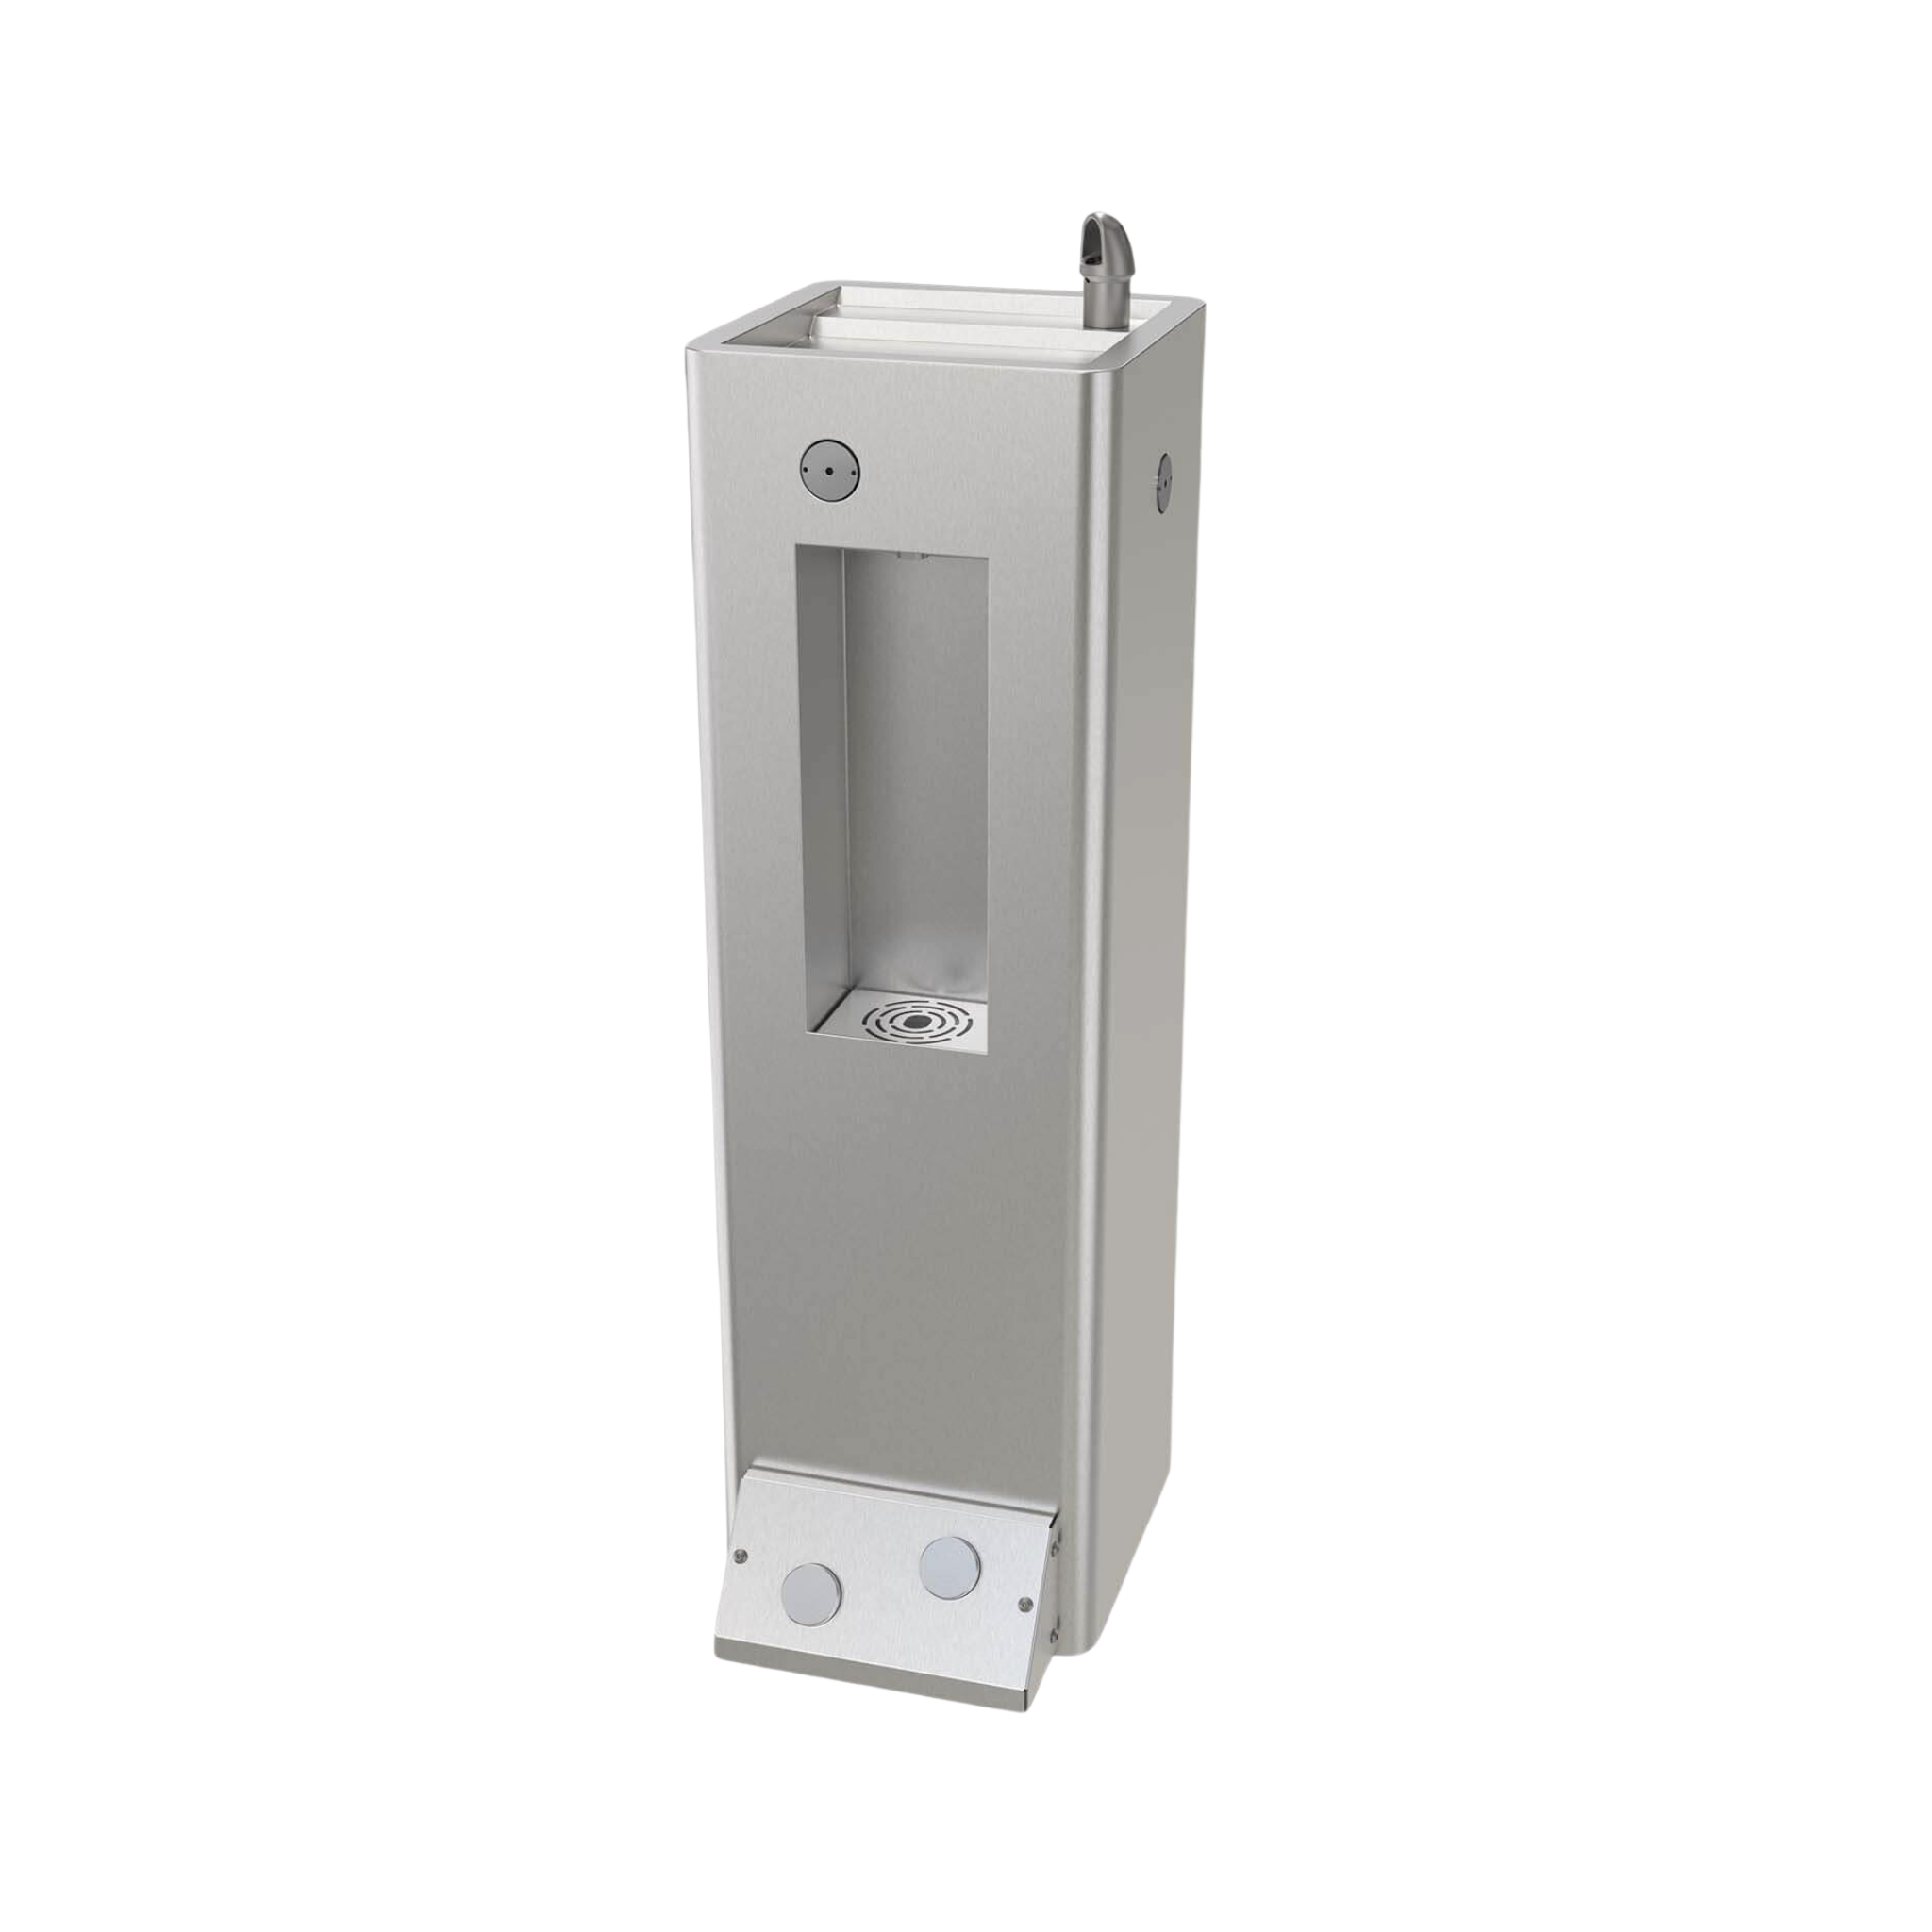 ECO-DF-BF-F | 142.500.903 | Stainless Steel Economy Outdoor Pedestal Drinking Fountain with Bottle Filler